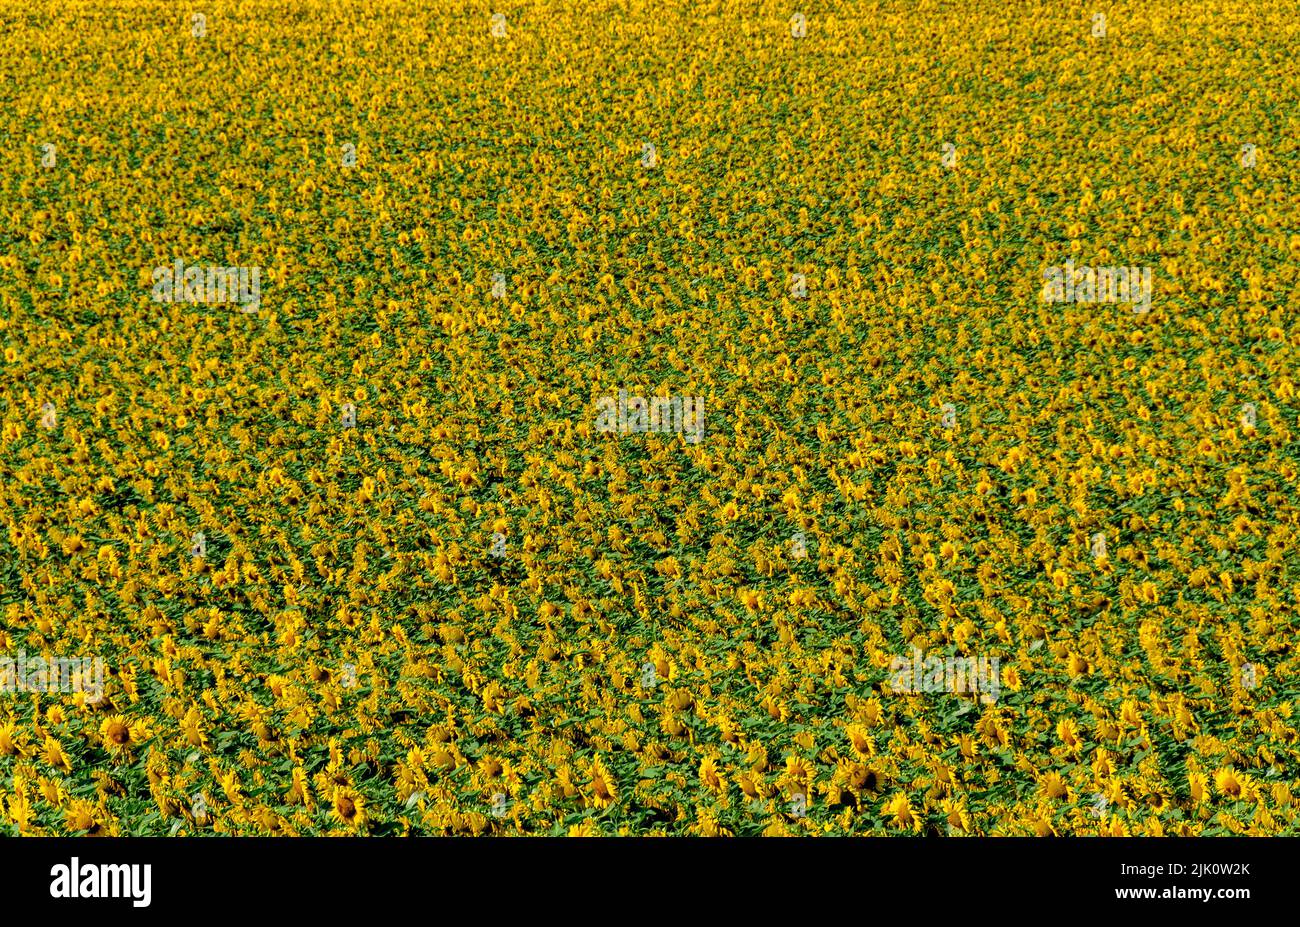 View of a growing sunflowers (Helianthus annuus) huge field. Auvergne Rhone Alpes, France Stock Photo